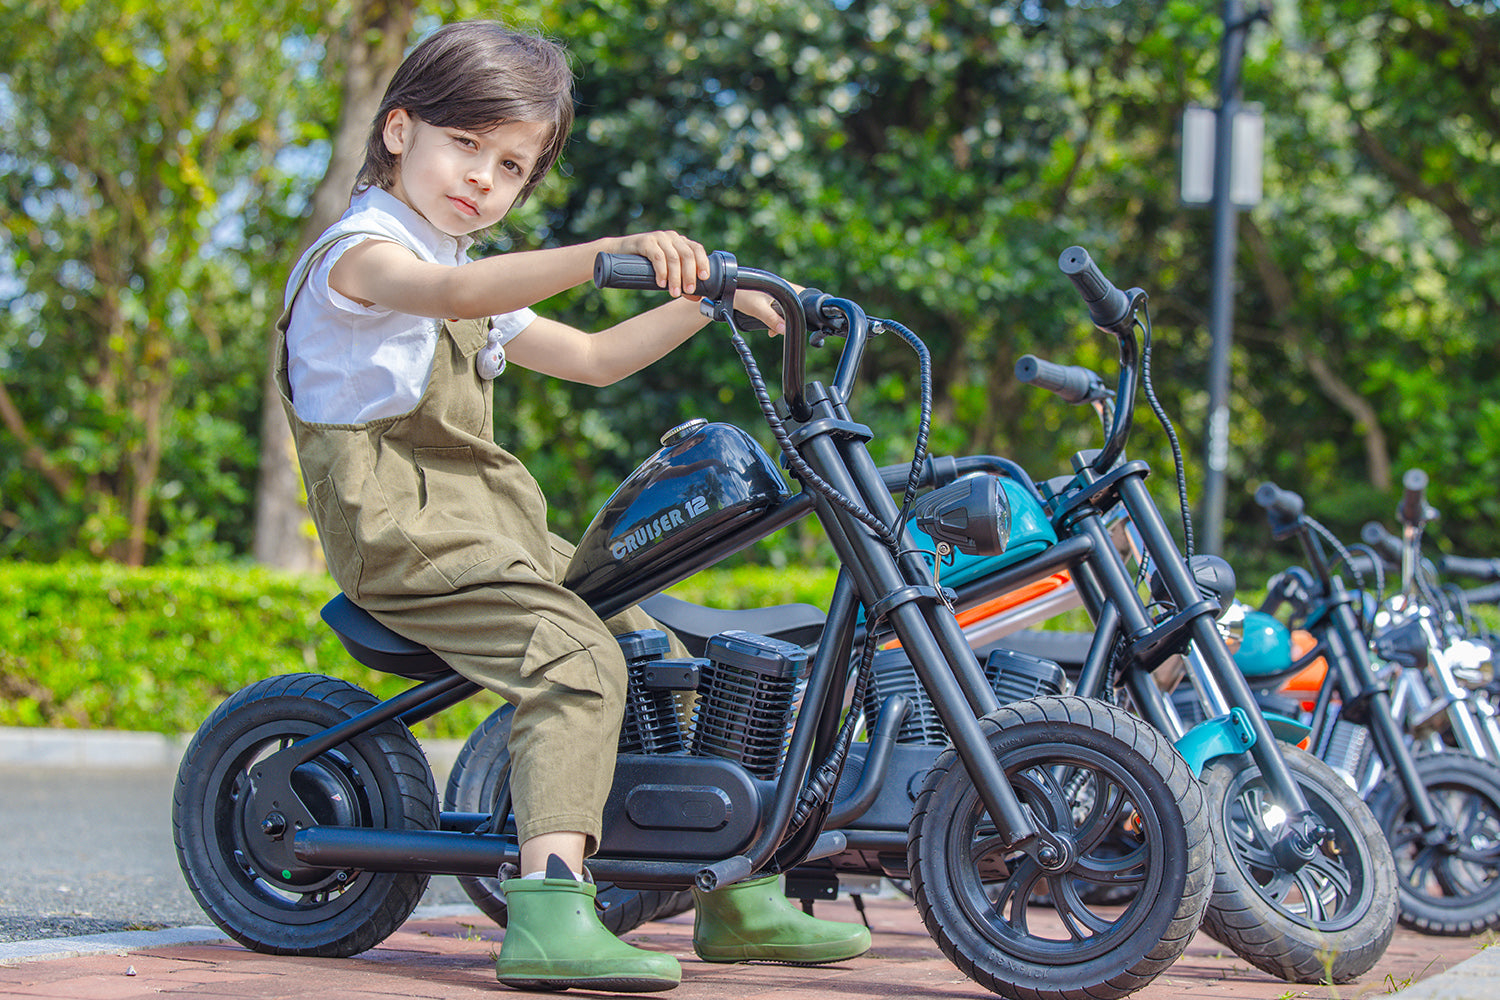 HYPER GOGO Electric Children's Motorcycle Maintenance Guide